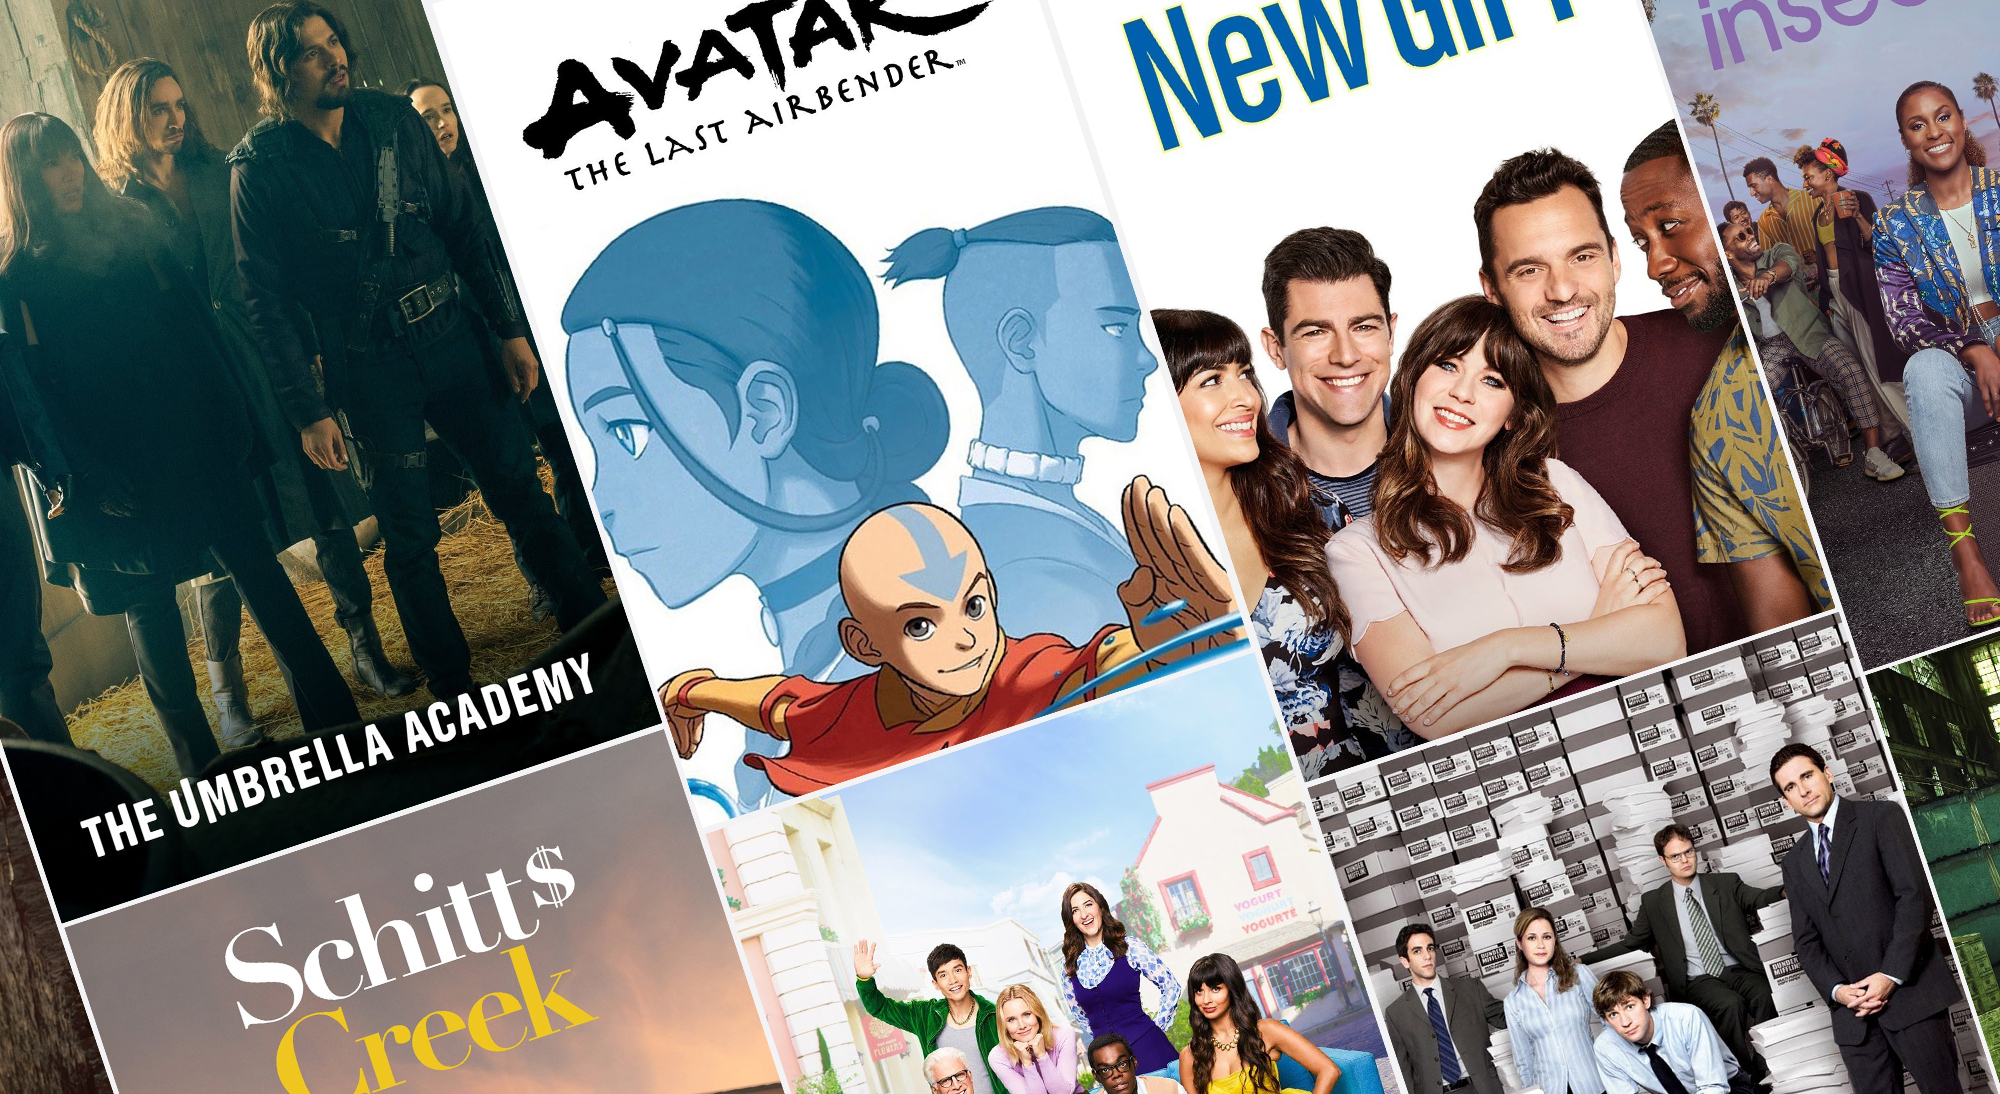 A composite photo of television show posters including for Avatar the Last Air Bender, The Office, Insecure, New Girl, and Umbrella Academy